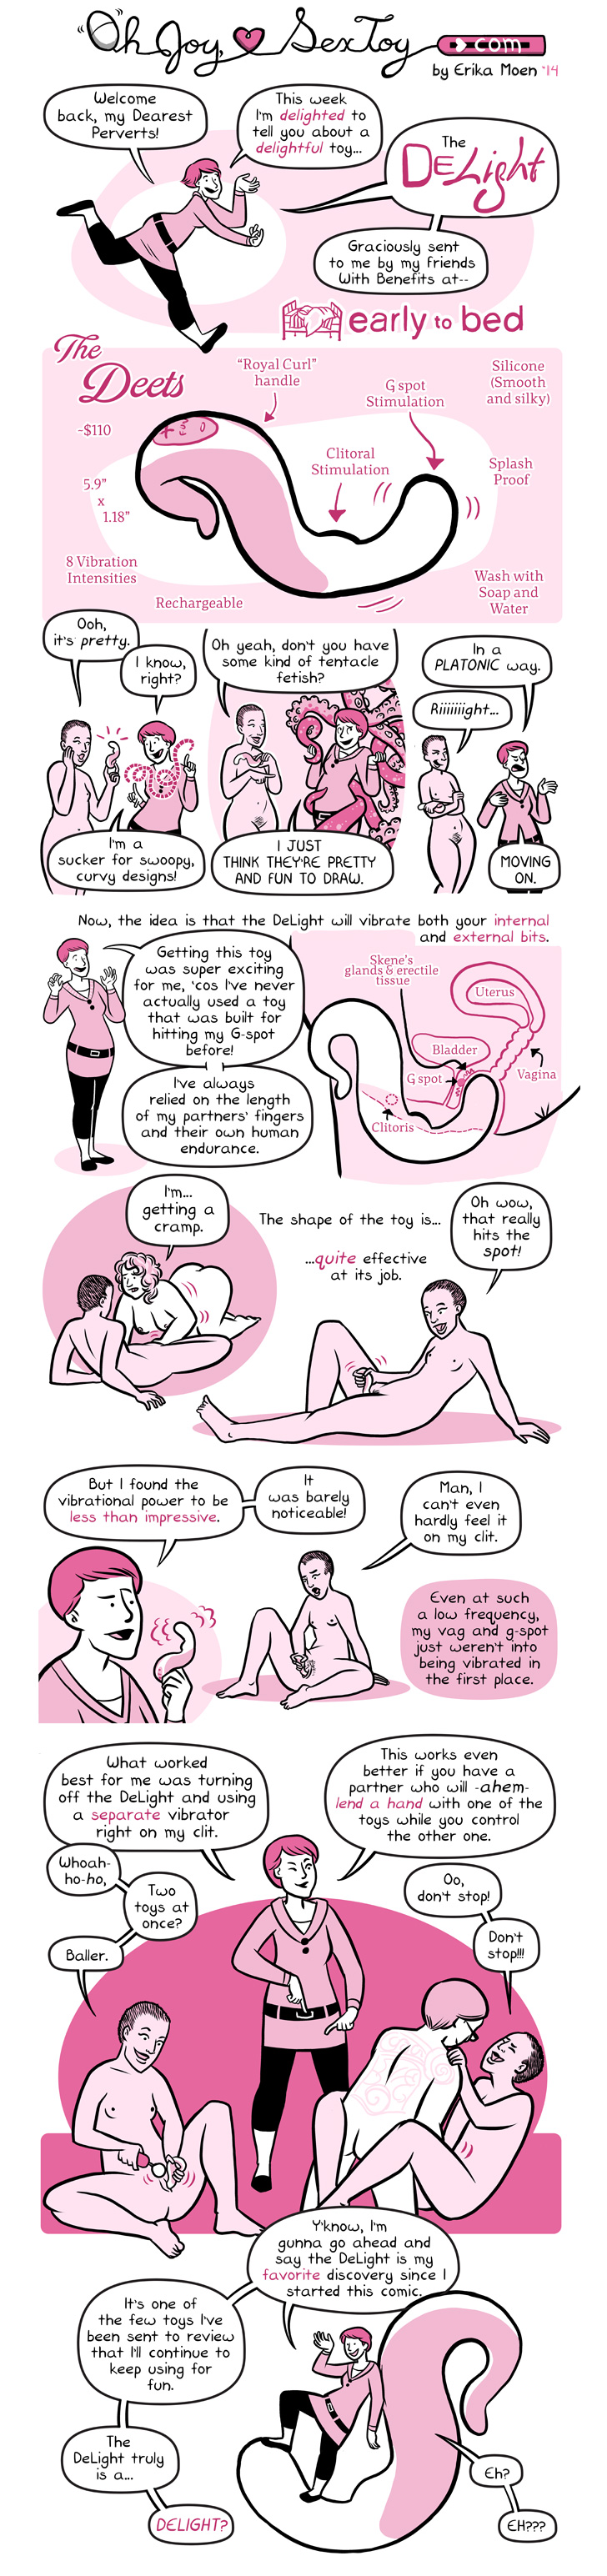 A comic about the delight g-spot vibrator